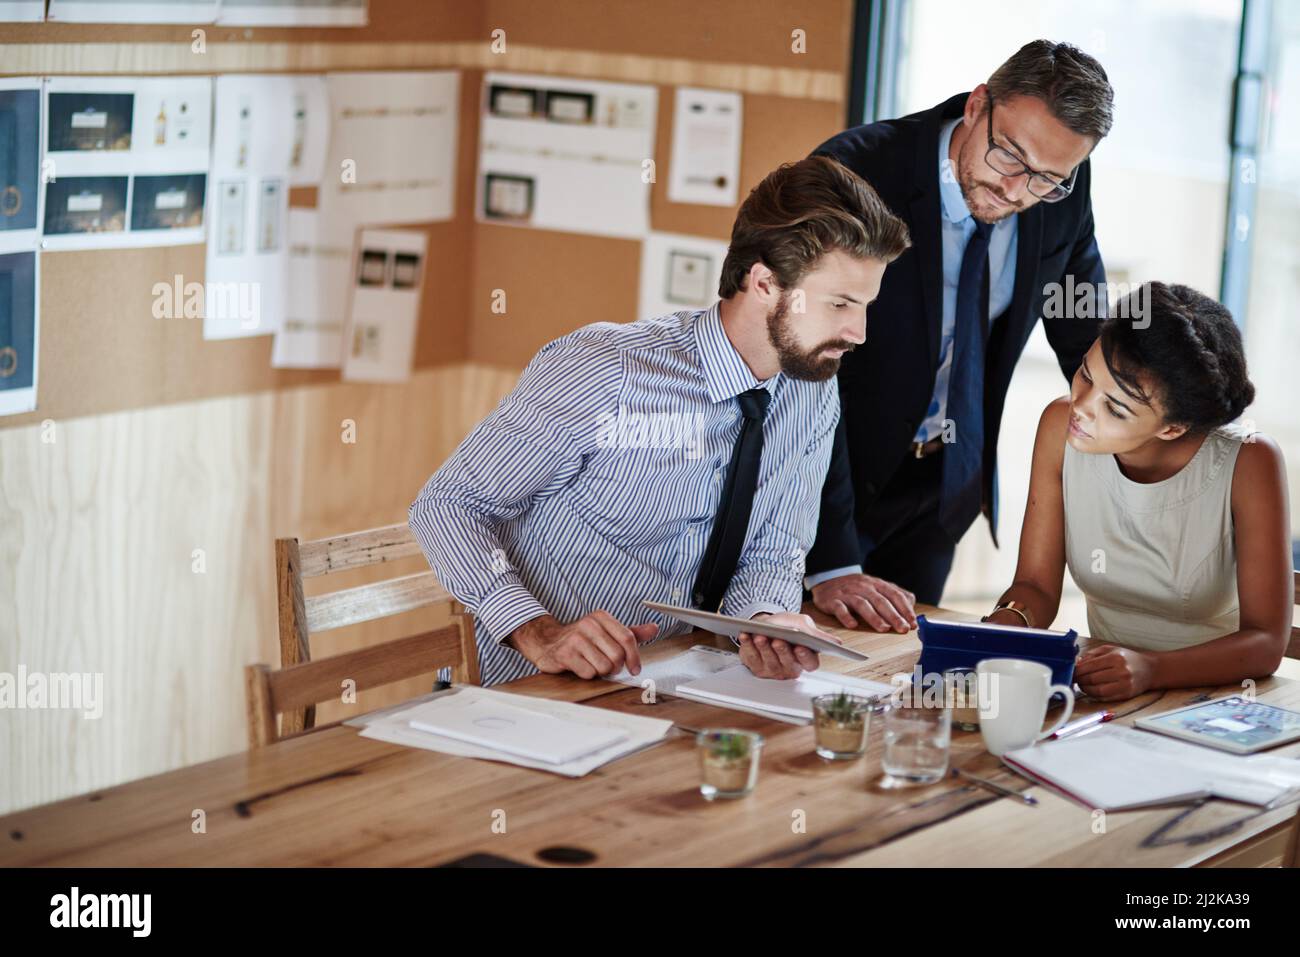 Idea people in action. Shot of a group of colleagues working together in an office. Stock Photo